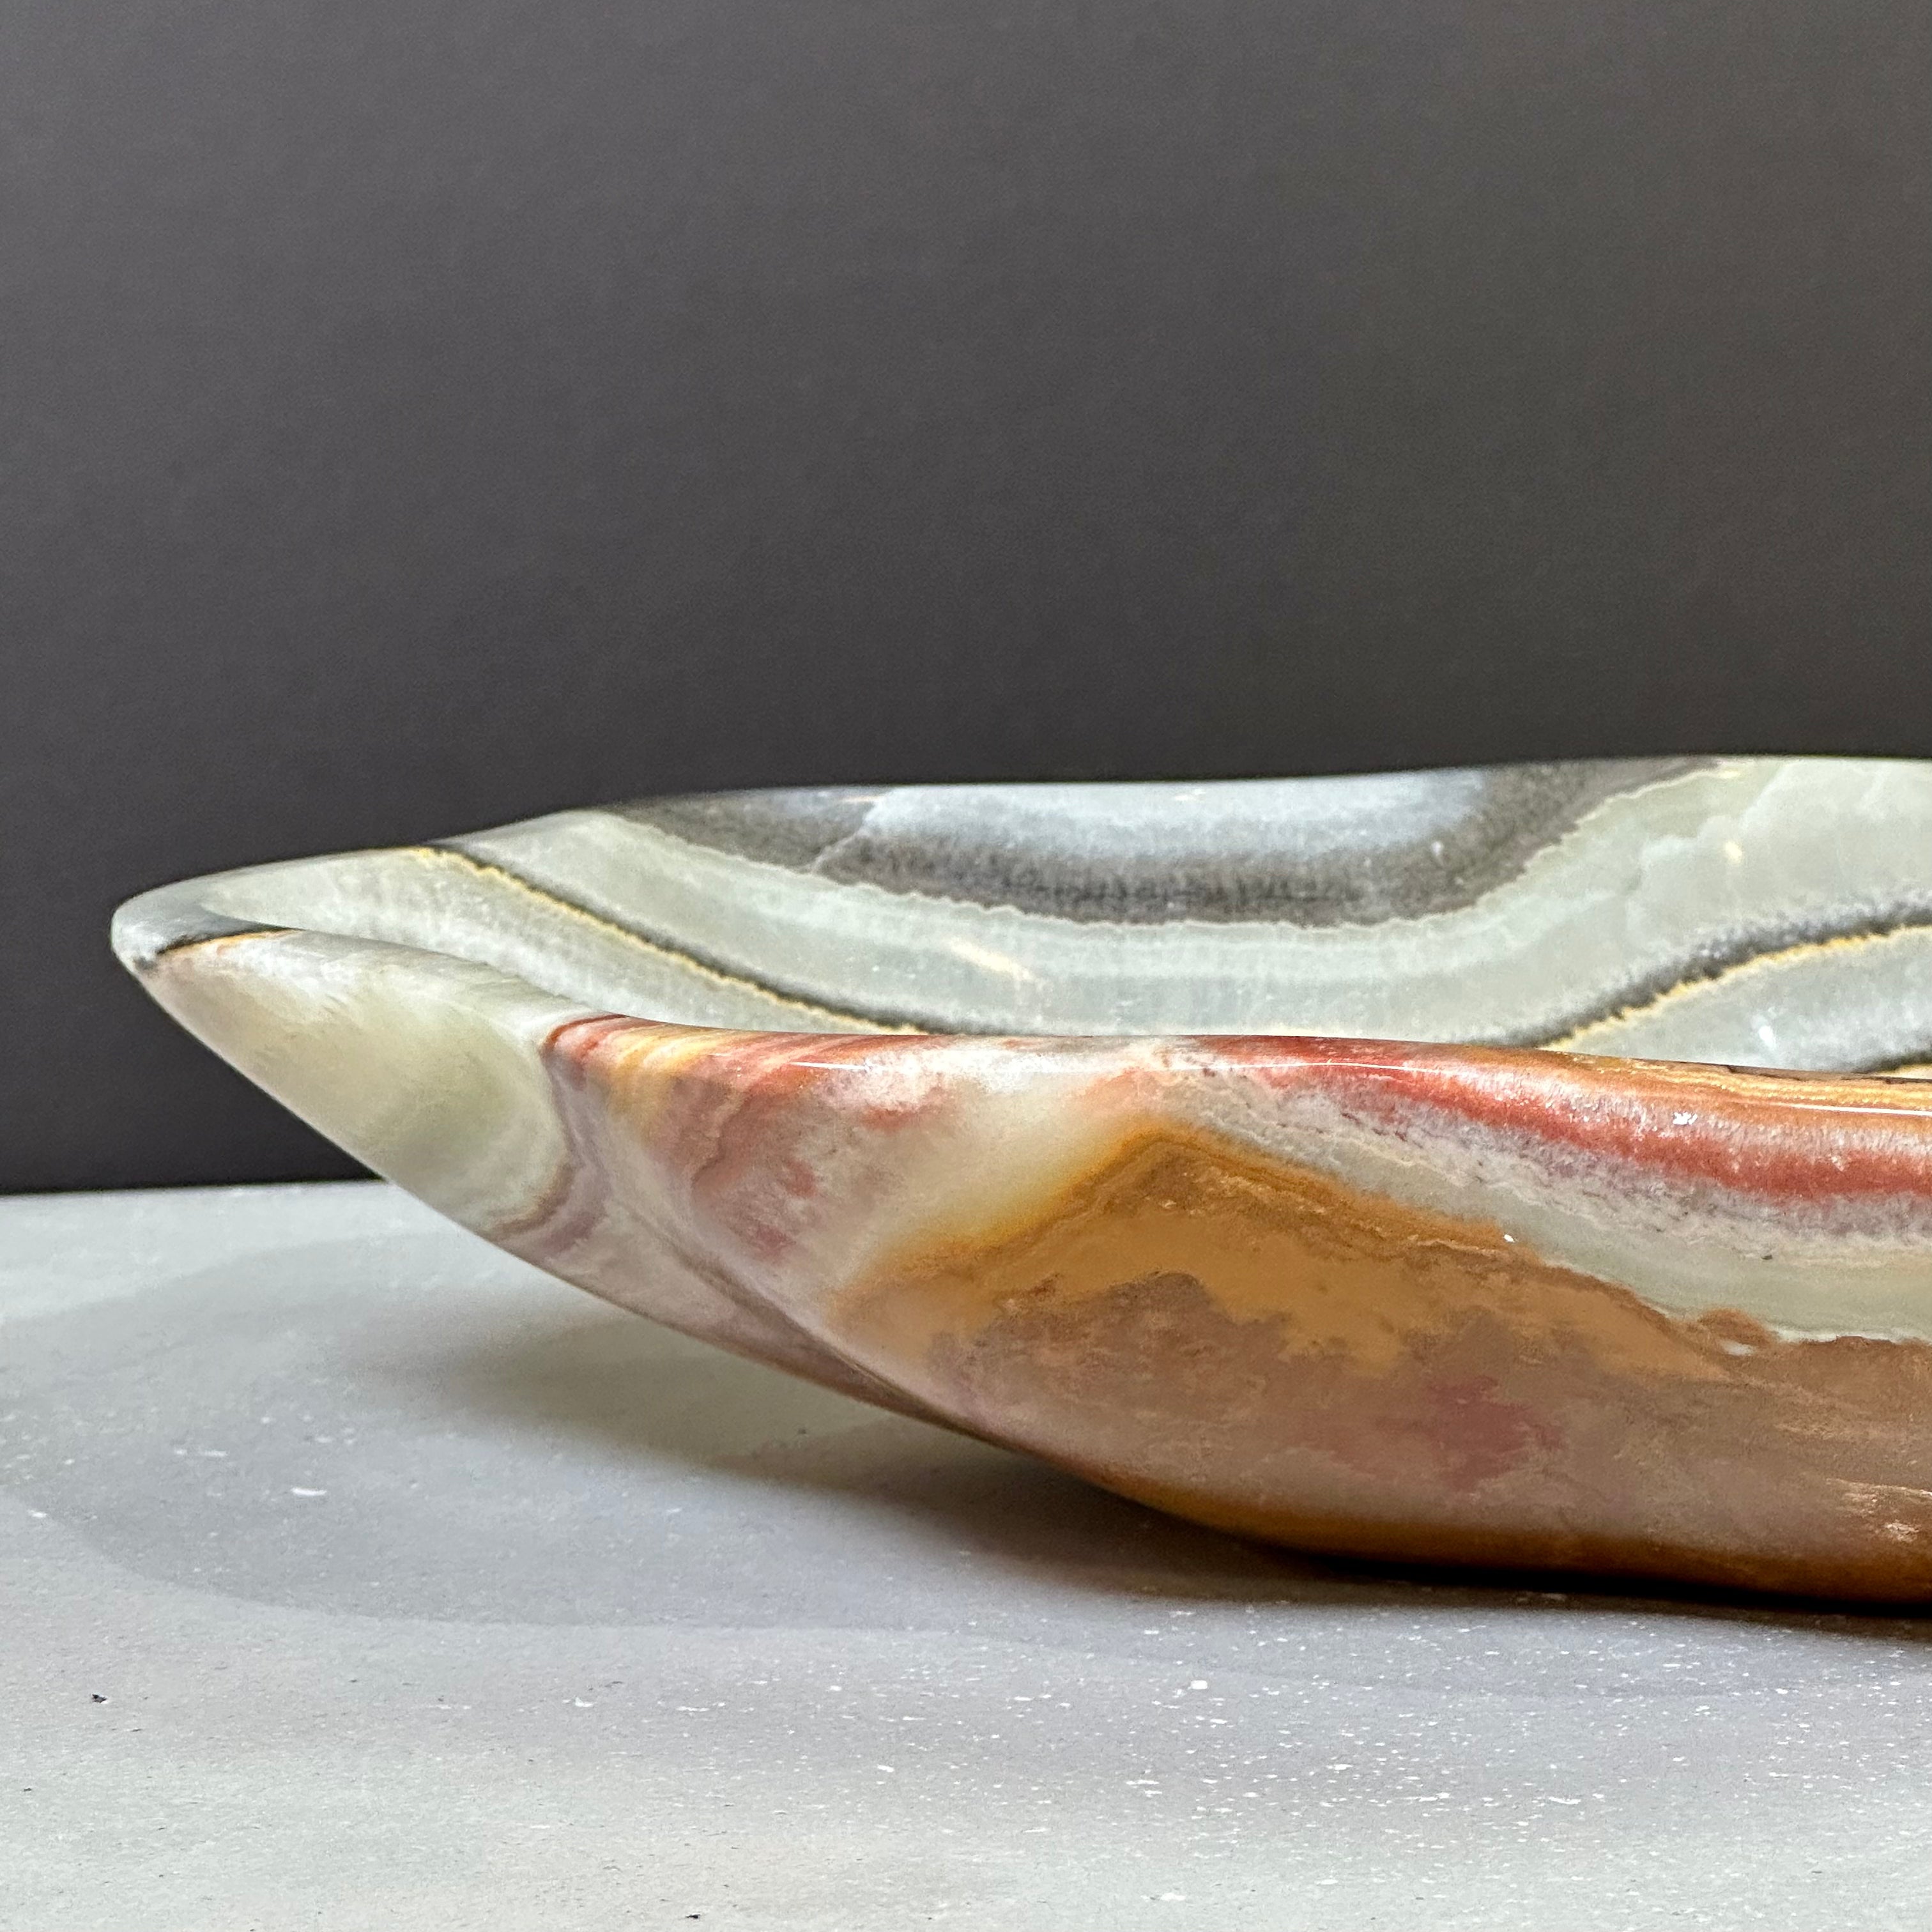 Onyx Banded Bowl - Handcarved